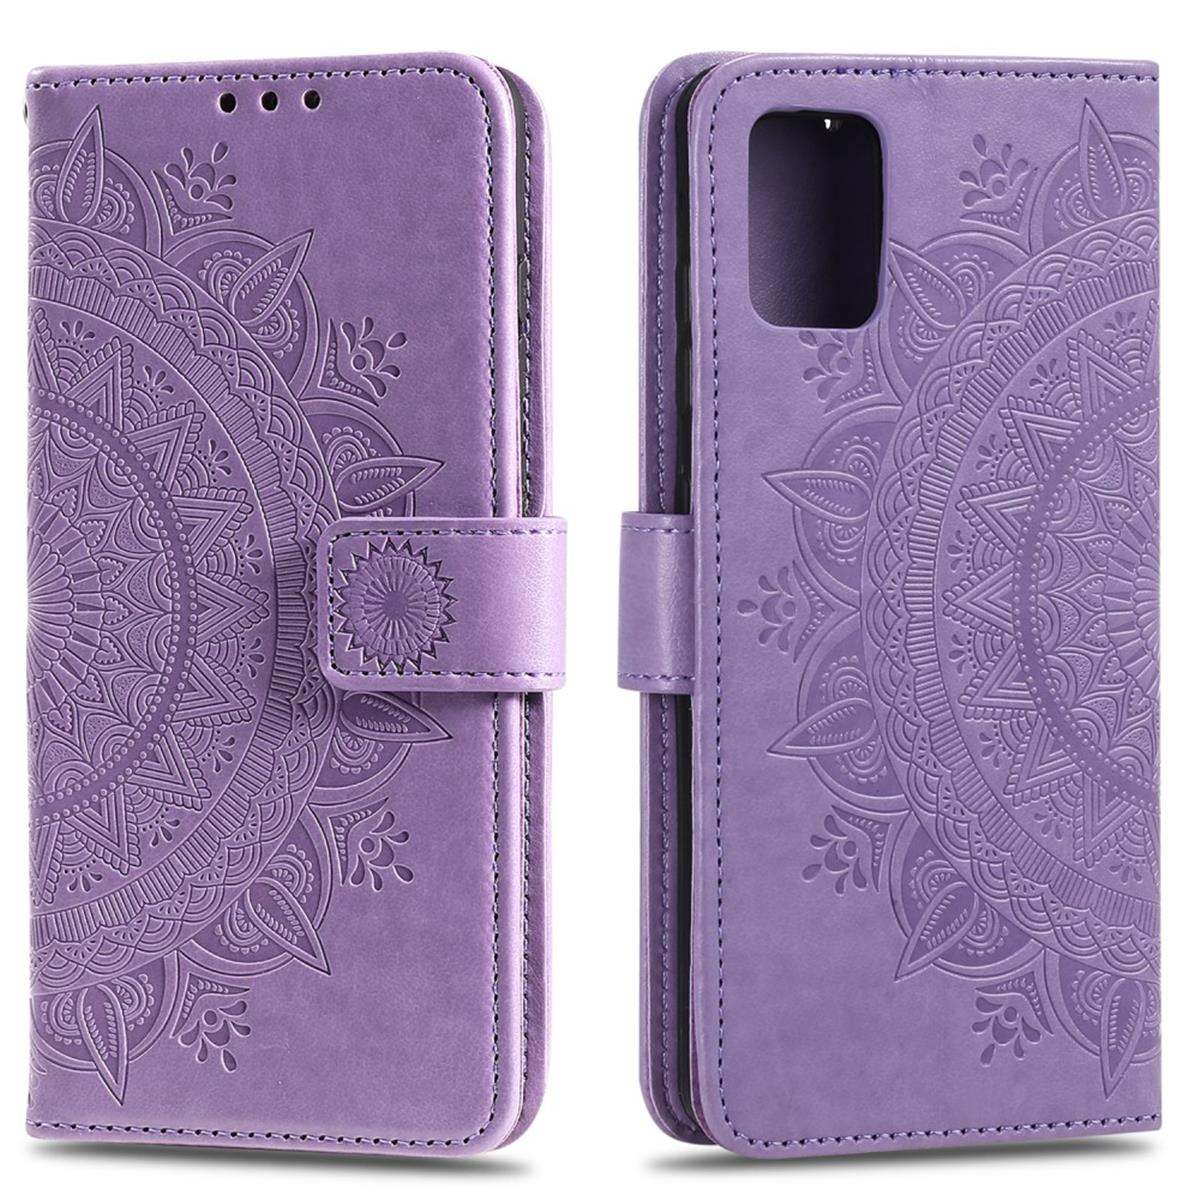 COVERKINGZ Klapphülle mit Mandala Samsung, Lila Muster, A51, Galaxy Bookcover